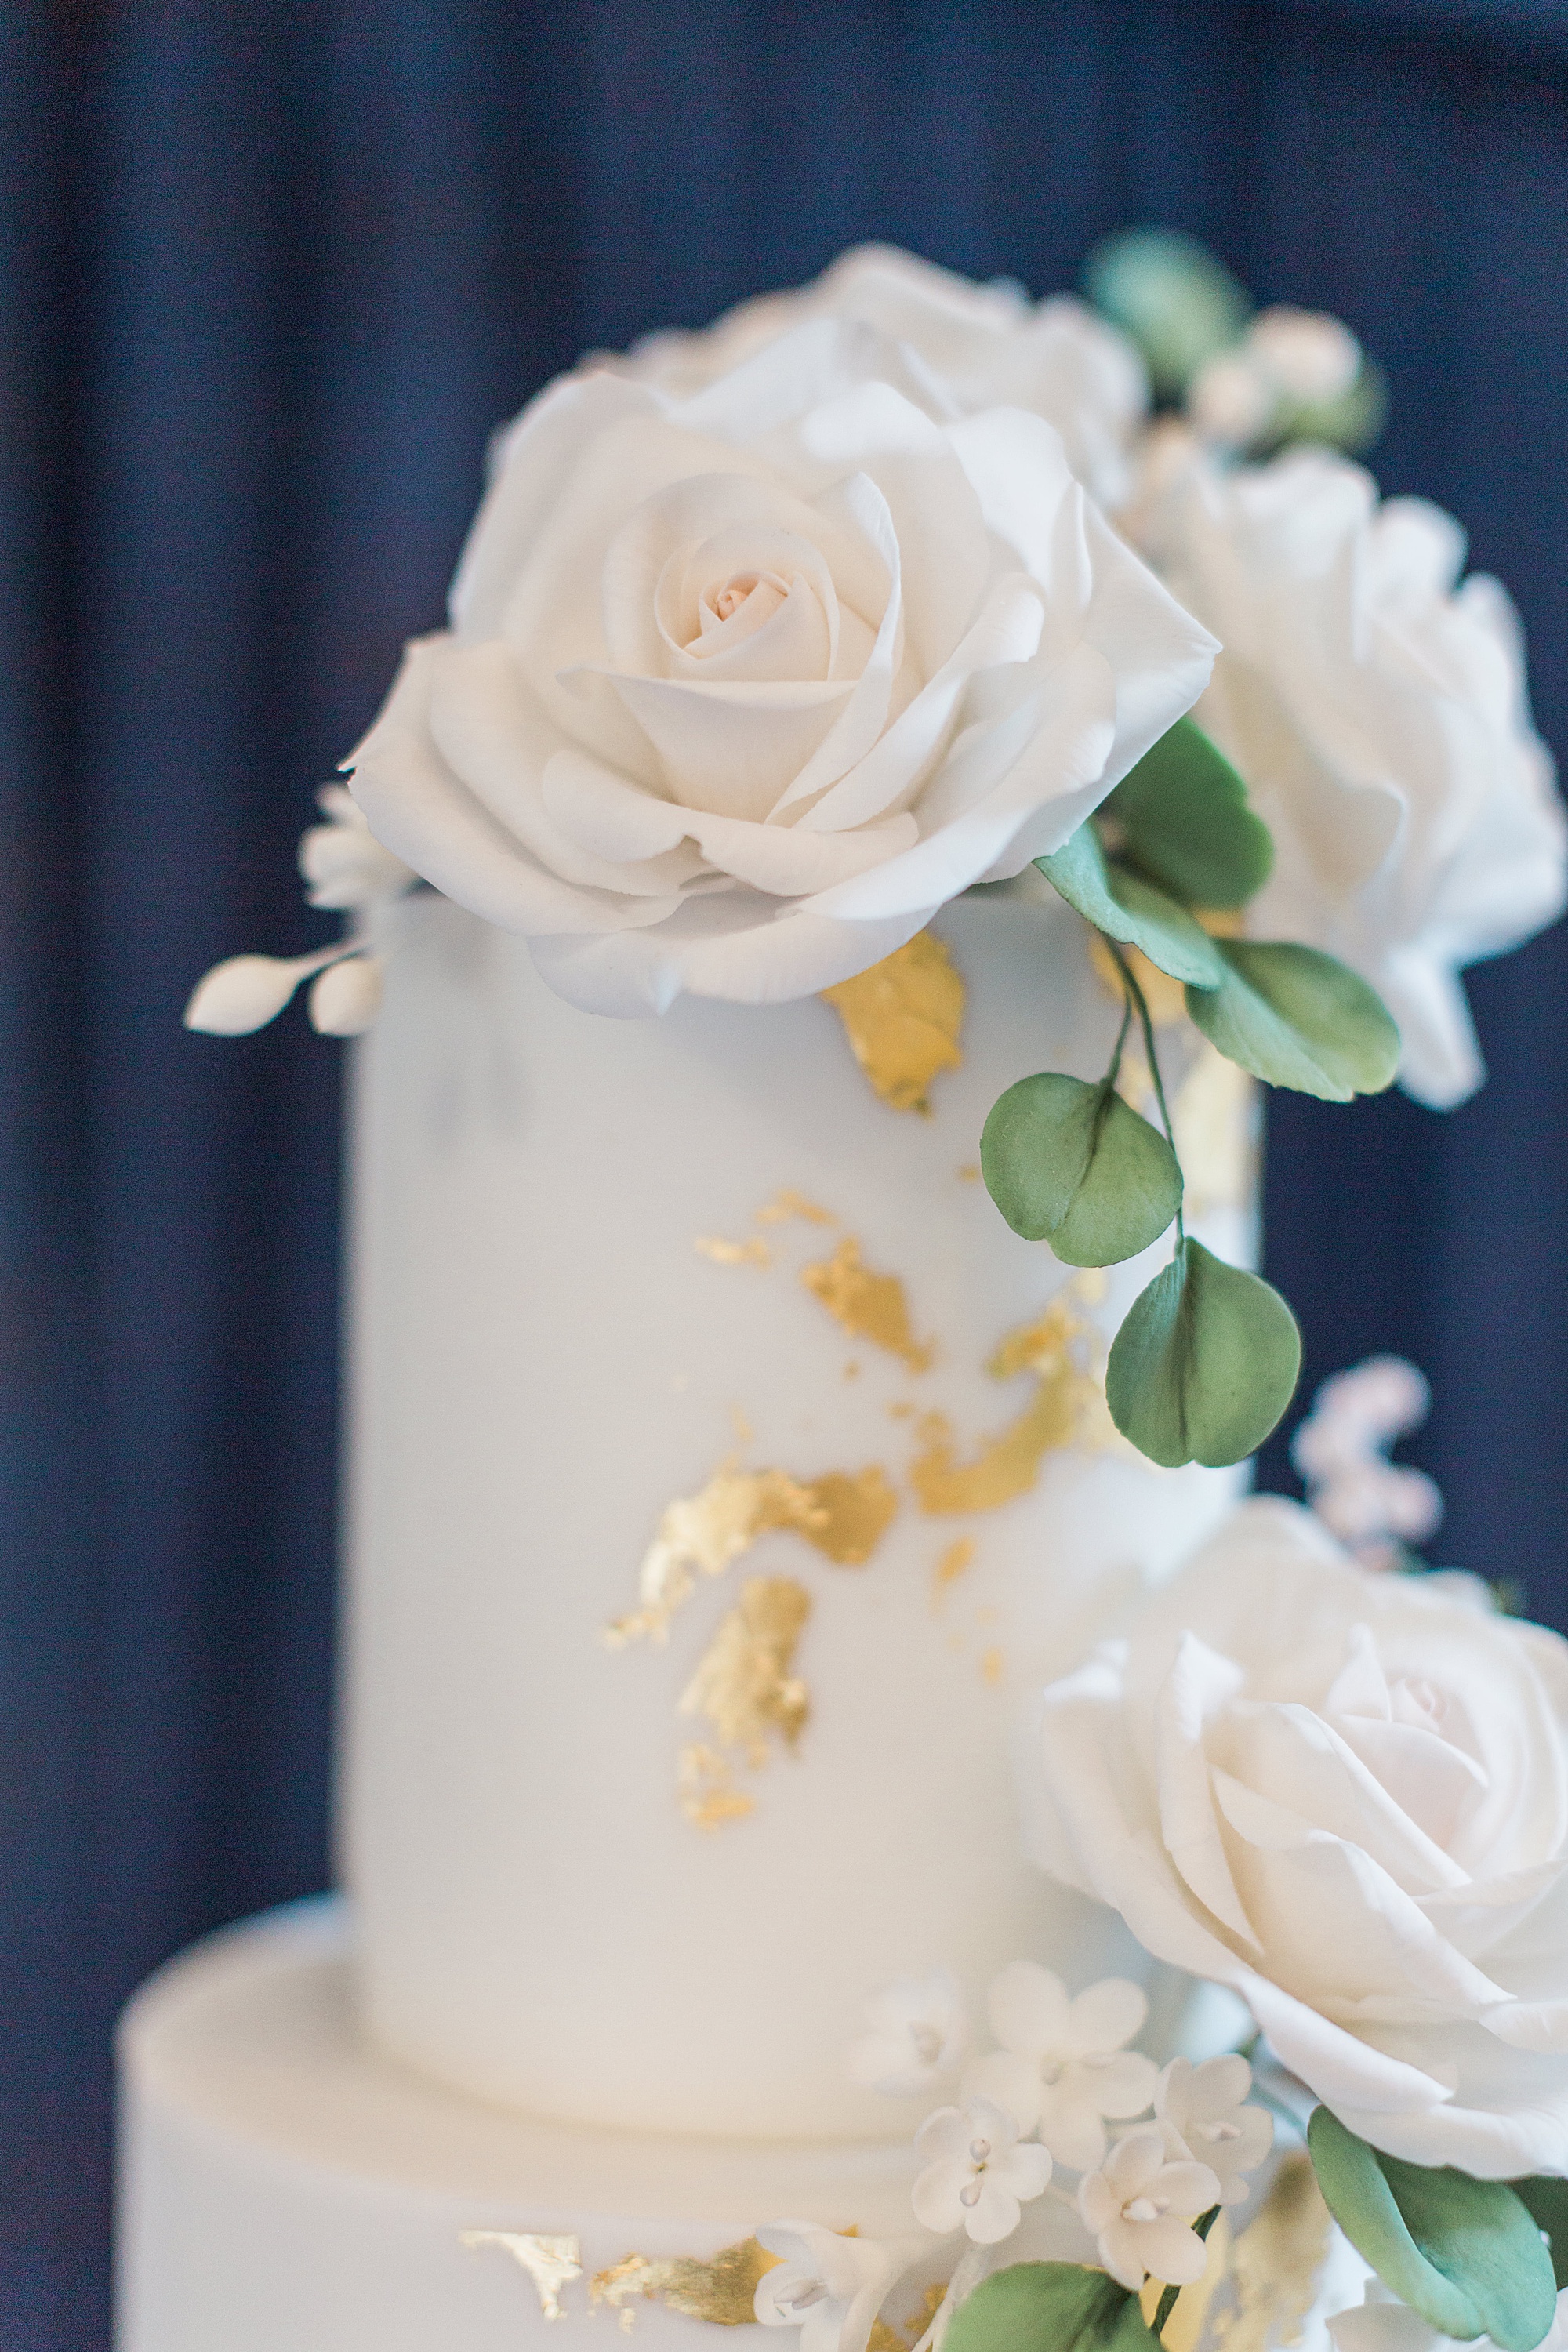 photo shows the detail of a wedding cake including the intricate icing and flowers made by the cake maker. The cake is by karen McGowan and at the abbey hotel malvern 